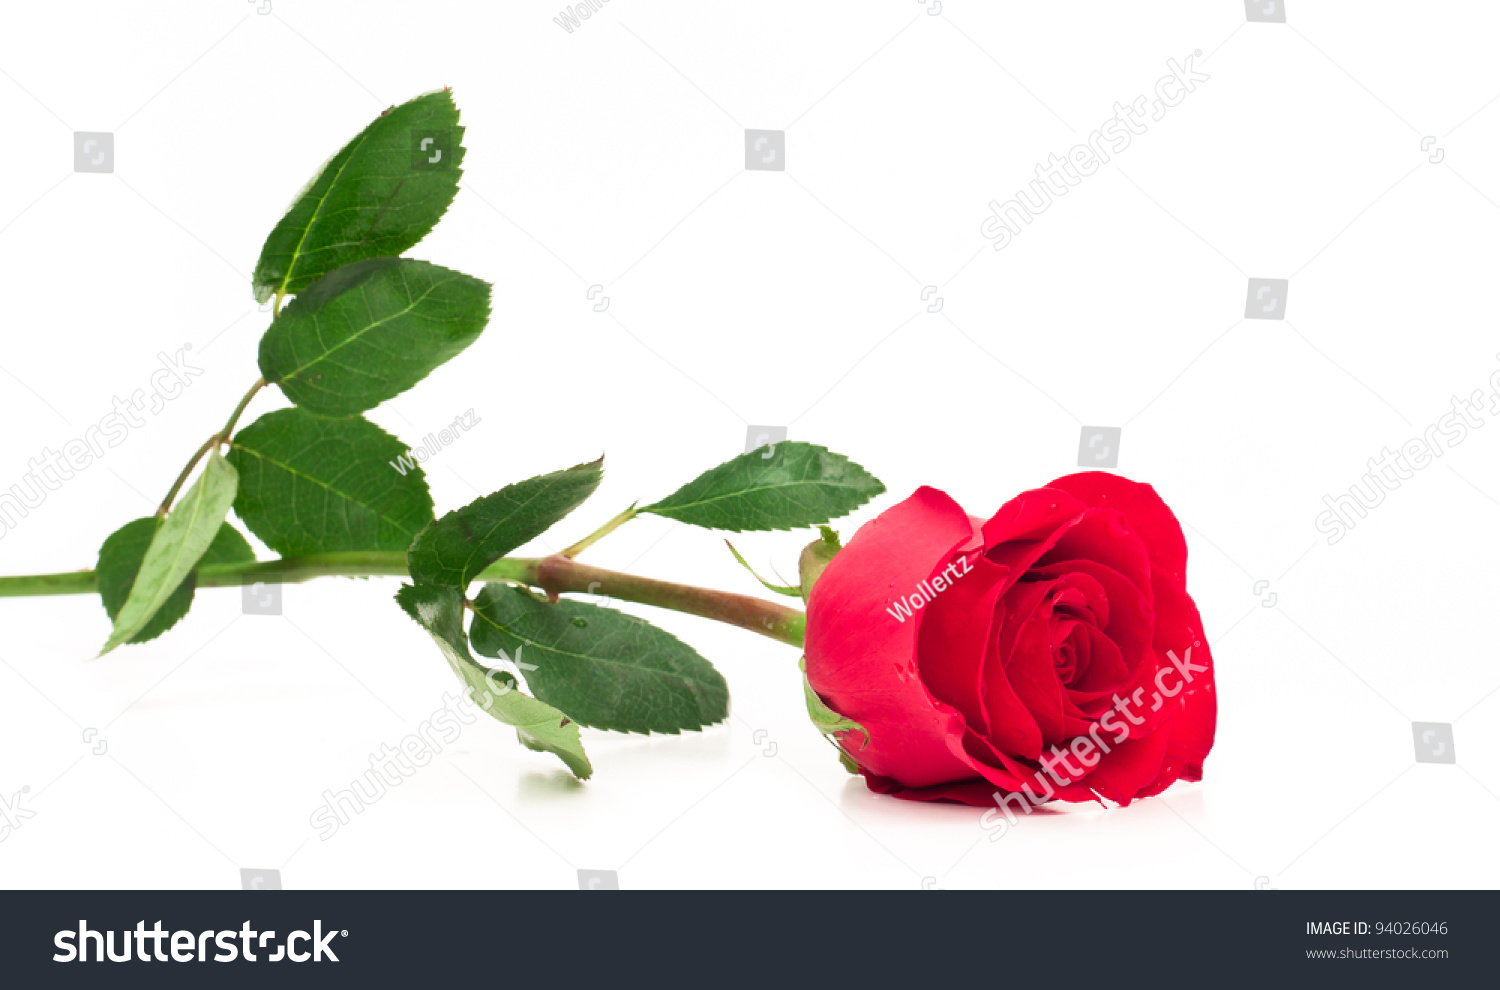 Red Rose With Stem